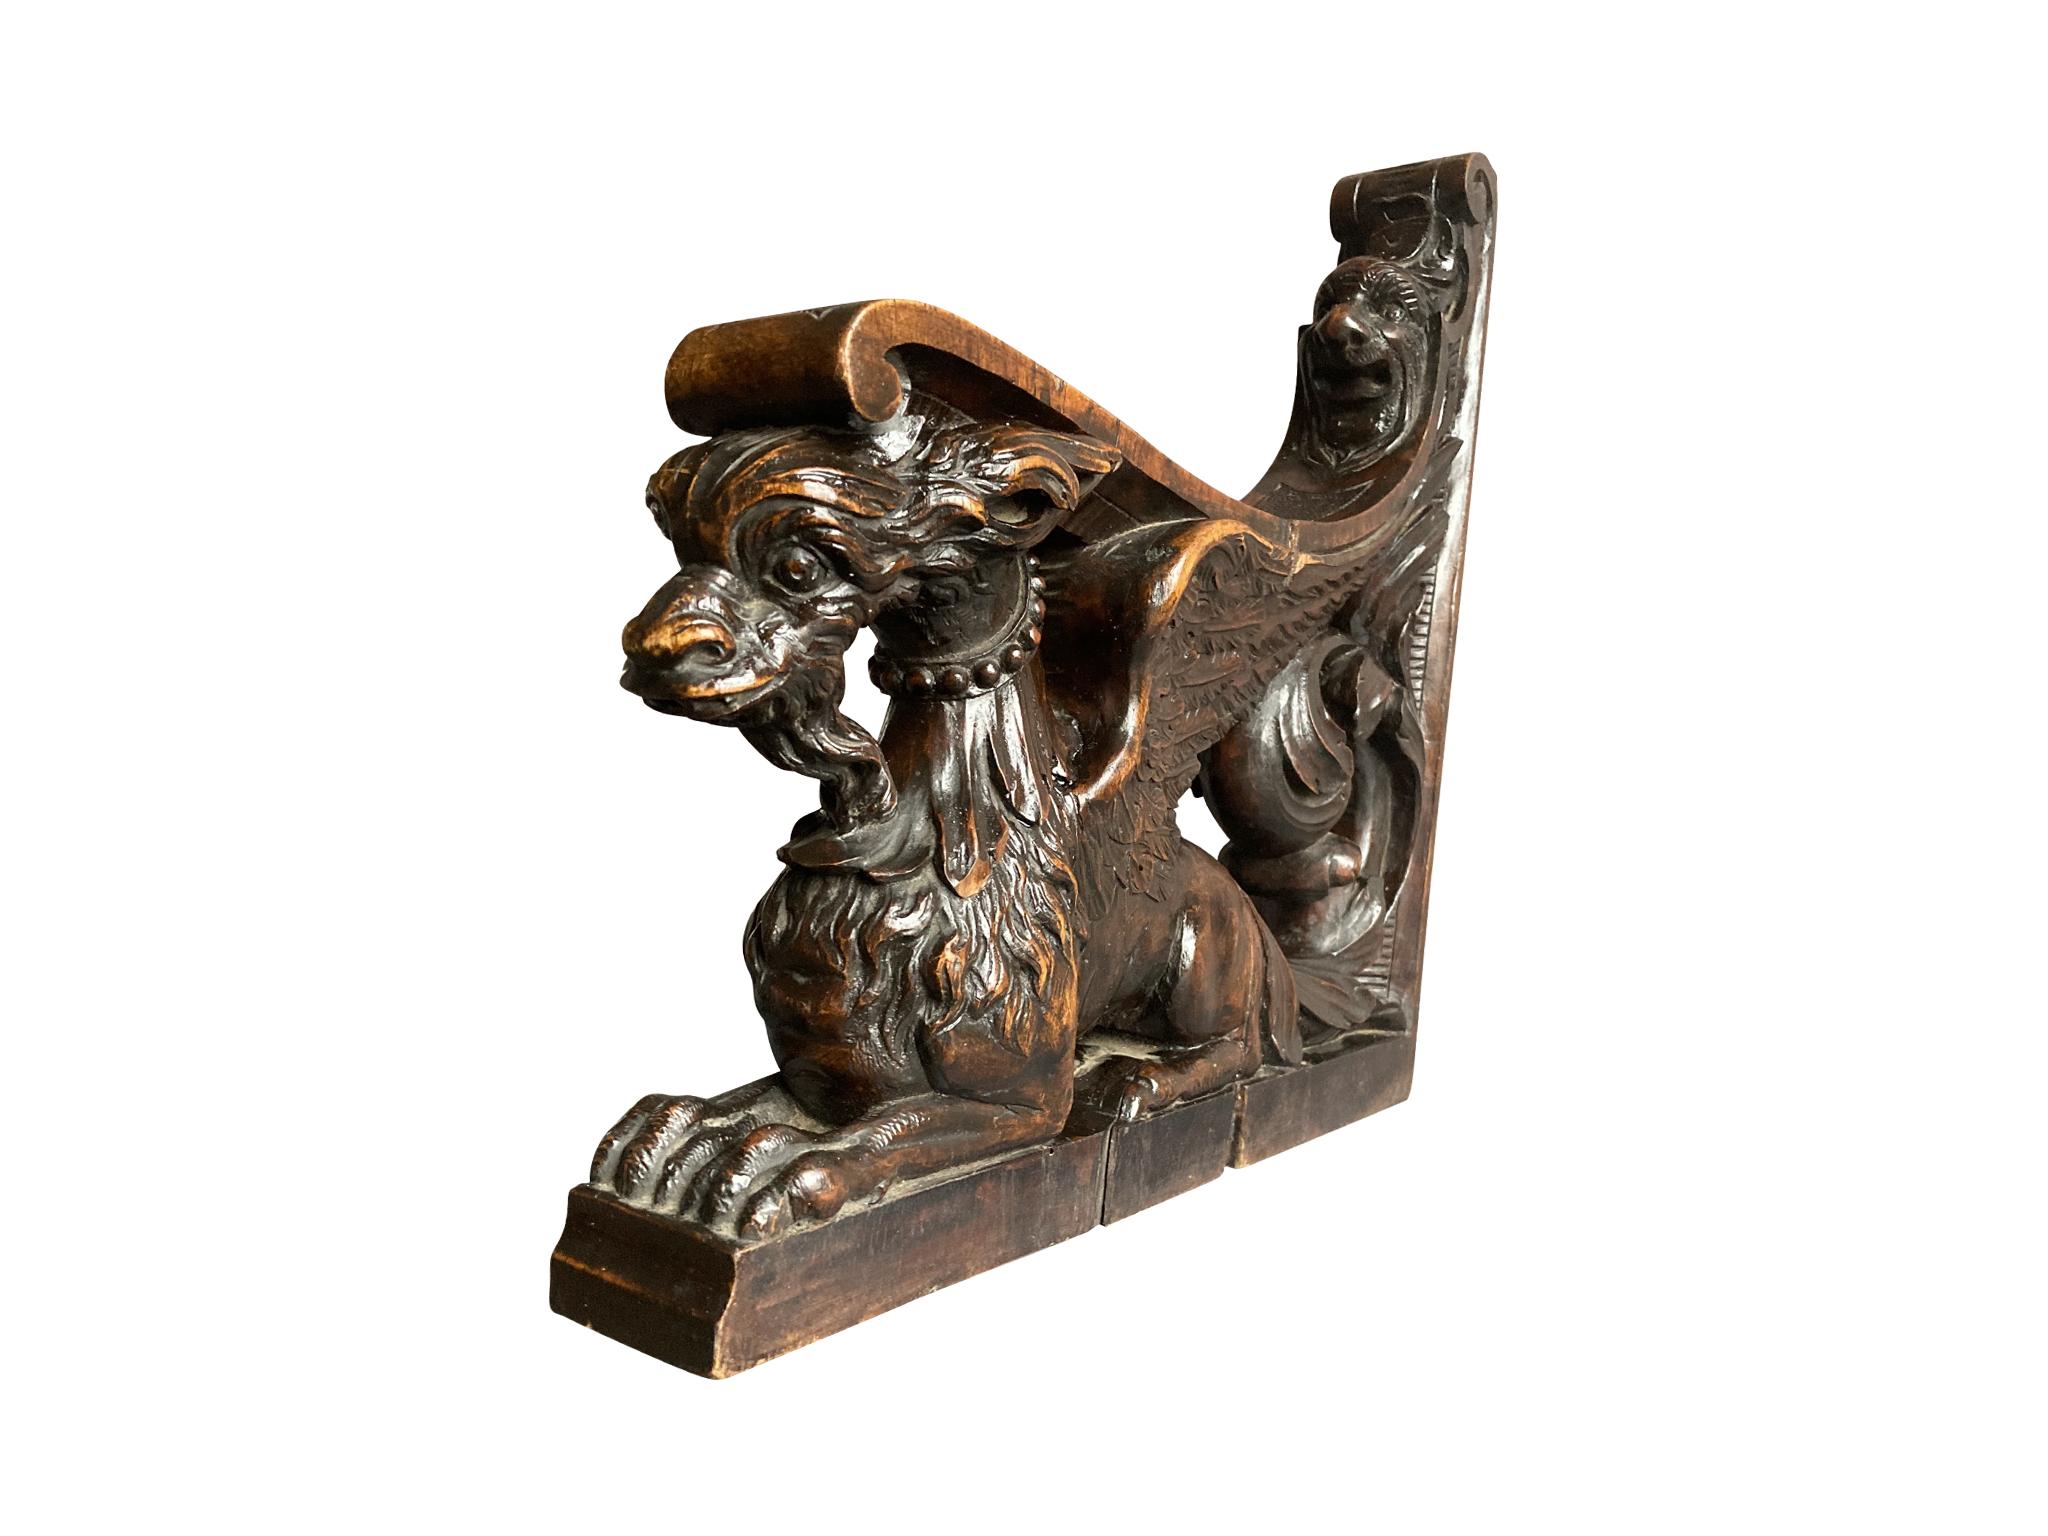 Late 19th century L-shaped architectural element, made in England. The charming design is a hand-carved griffon-shaped base that slopes upward and behind, transforming into an expressive face. The walnut wood has a warm red-brown patina. Over the